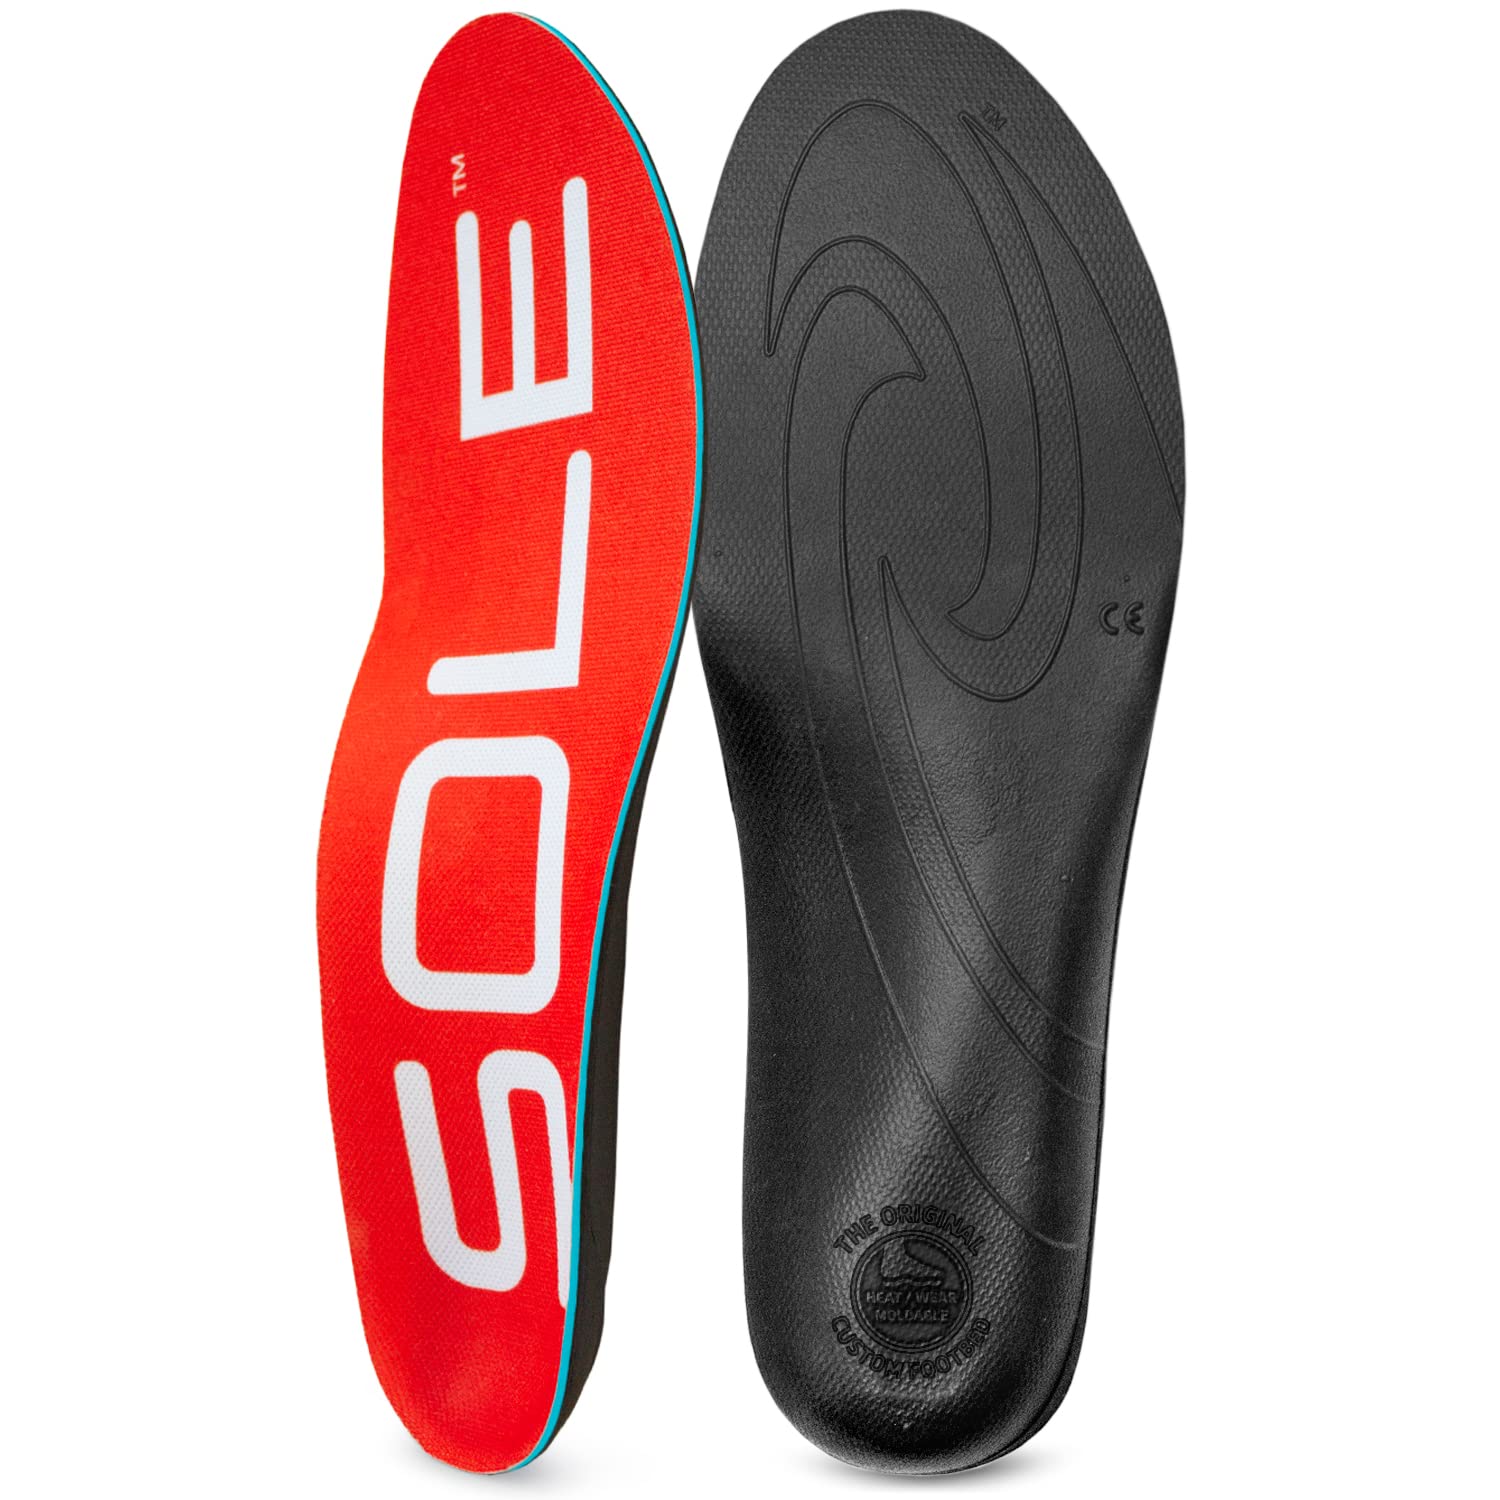 SOLE Active Medium - Plantar Fasciitis Relief Arch Support Insoles - Orthotic Shoe Inserts - Men's Size 6/Women's Size 8